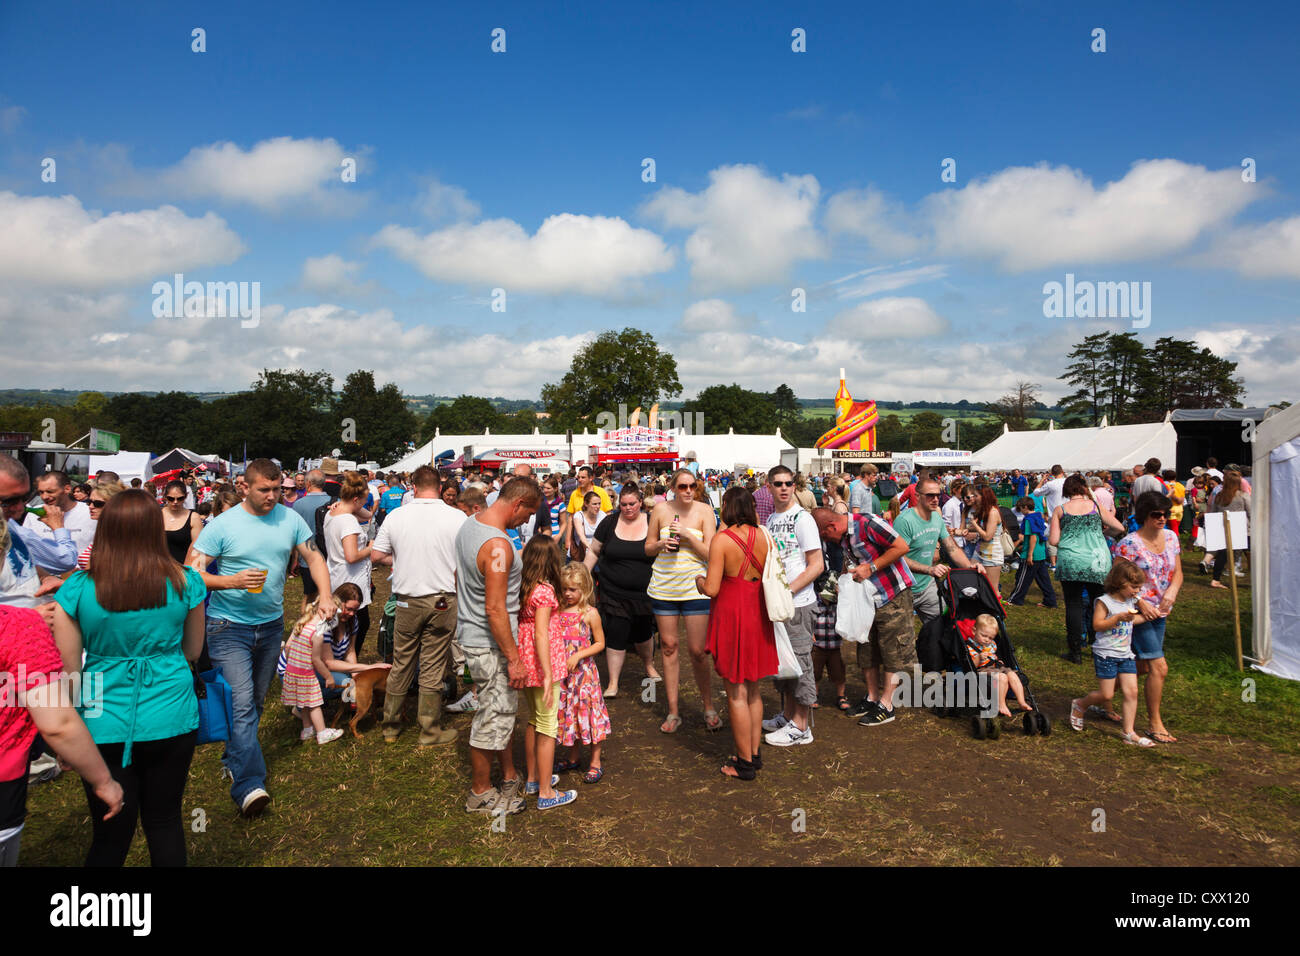 Crowds at the Mid Somerset agricultural show, UK Stock Photo